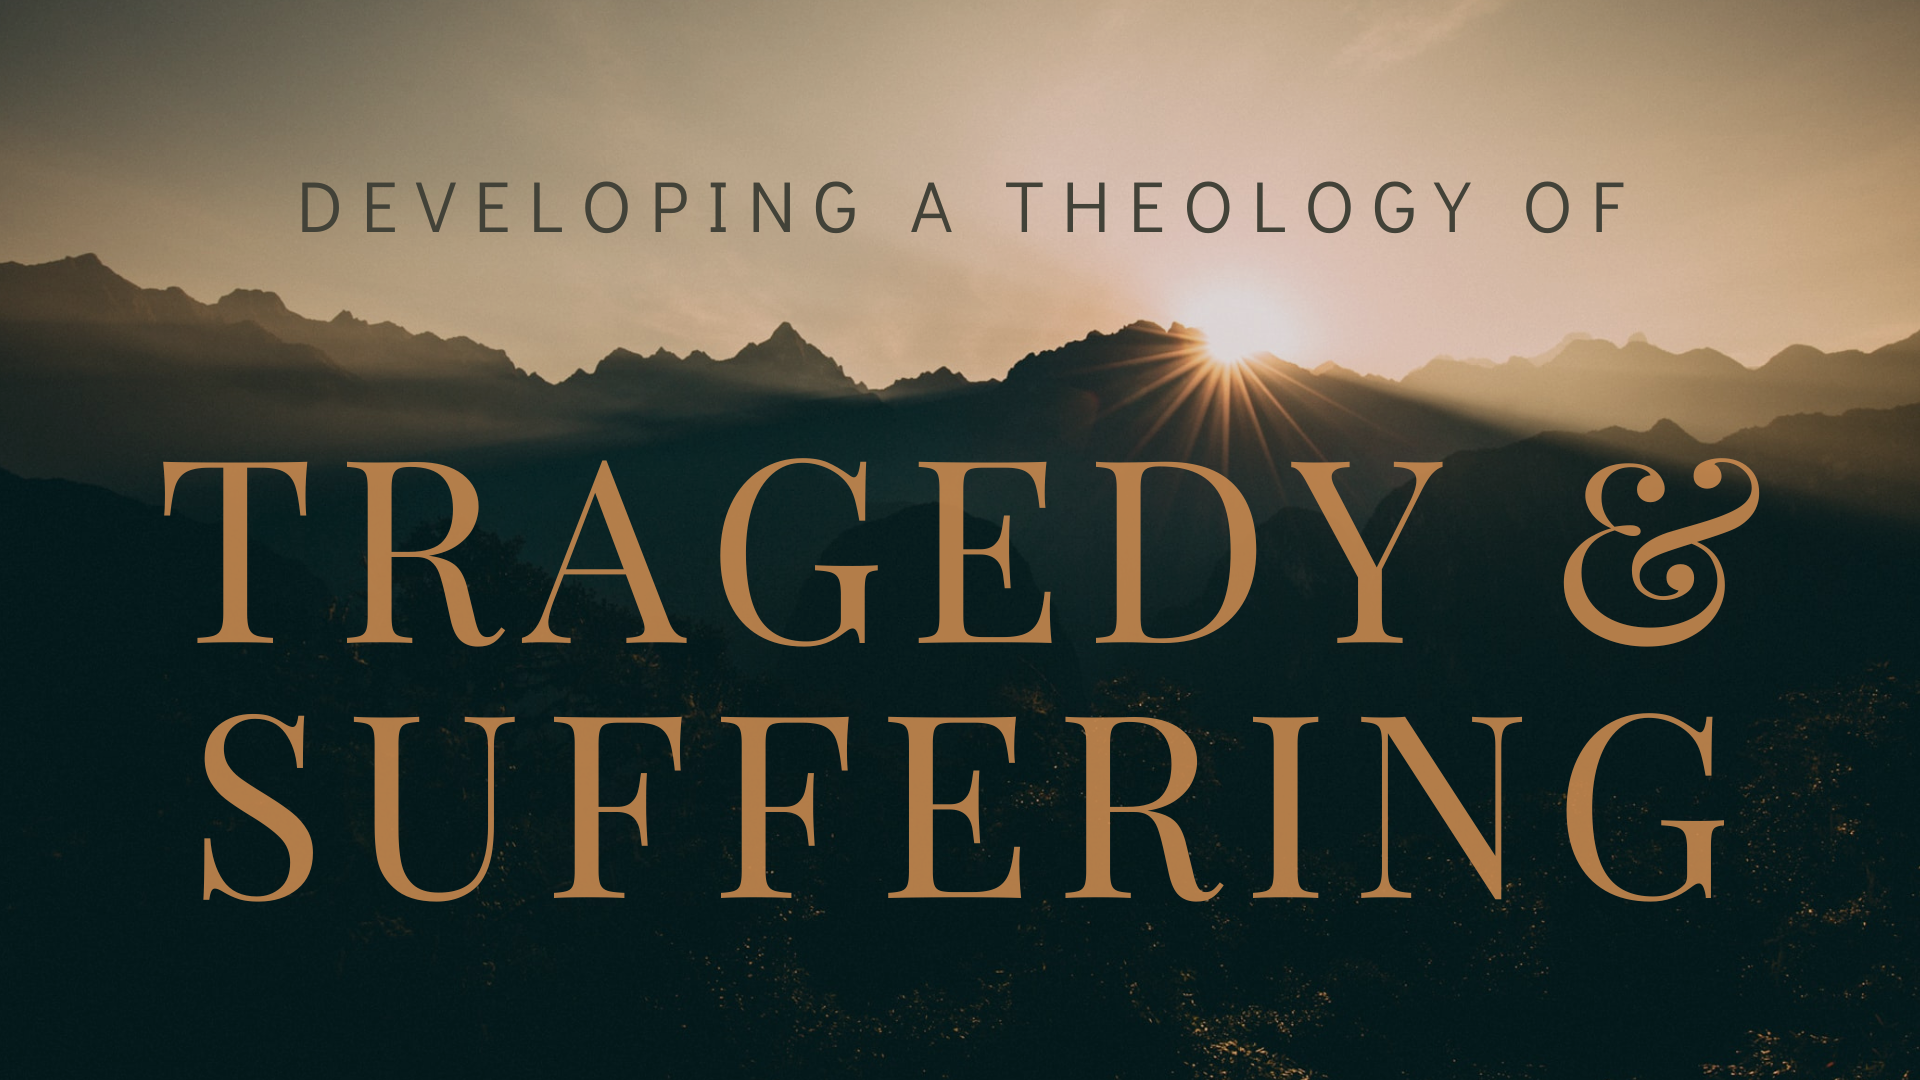 A Theology of Tragedy and Suffering Part 5